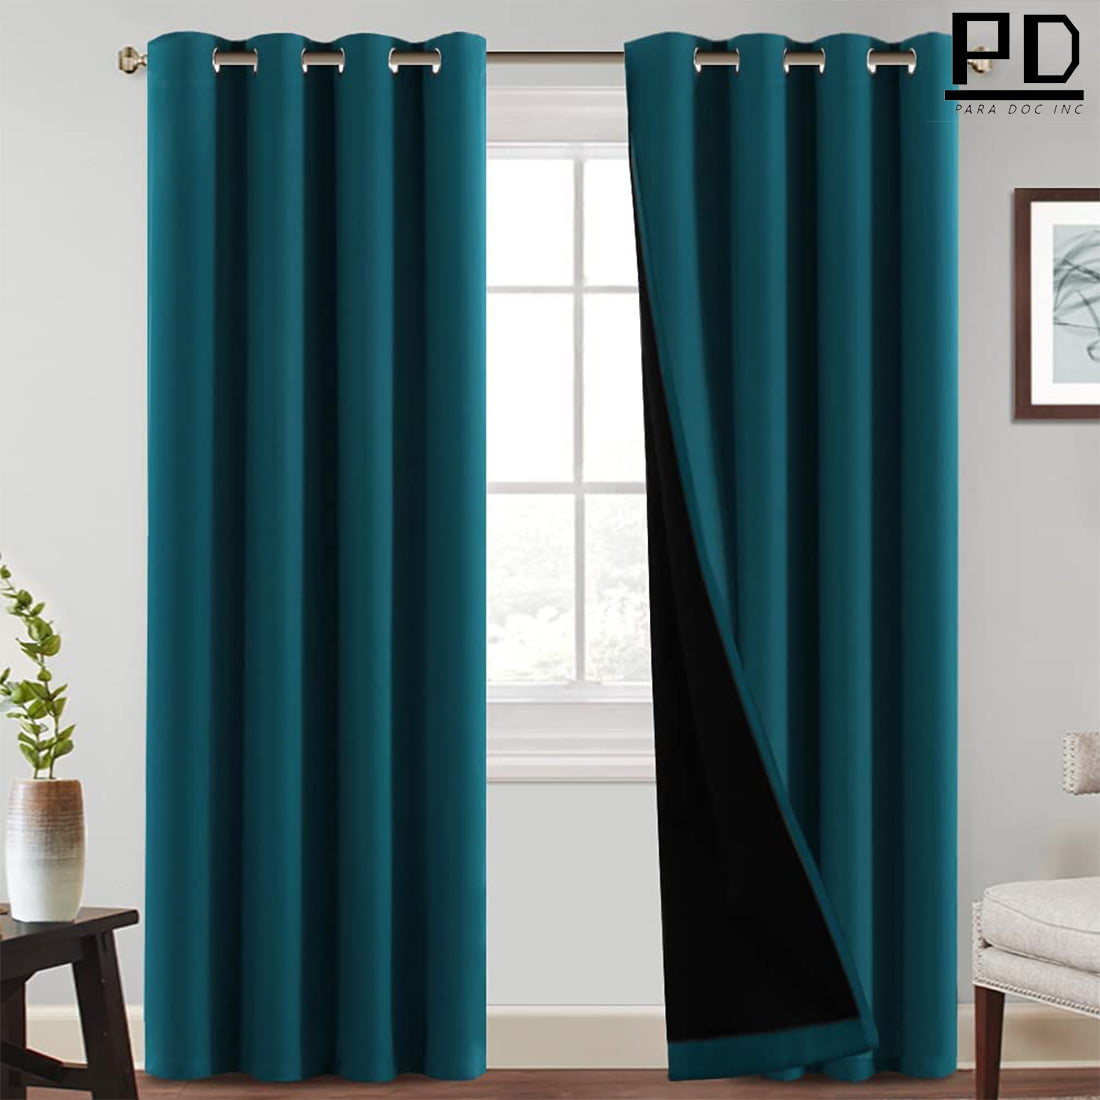 ZAANU Velcro Blackout Curtains - Simple Black Beanie Curtains for Bedroom  and Living Room - 2 Pieces Insulated Room Darkening Curtains (Green, 100 *